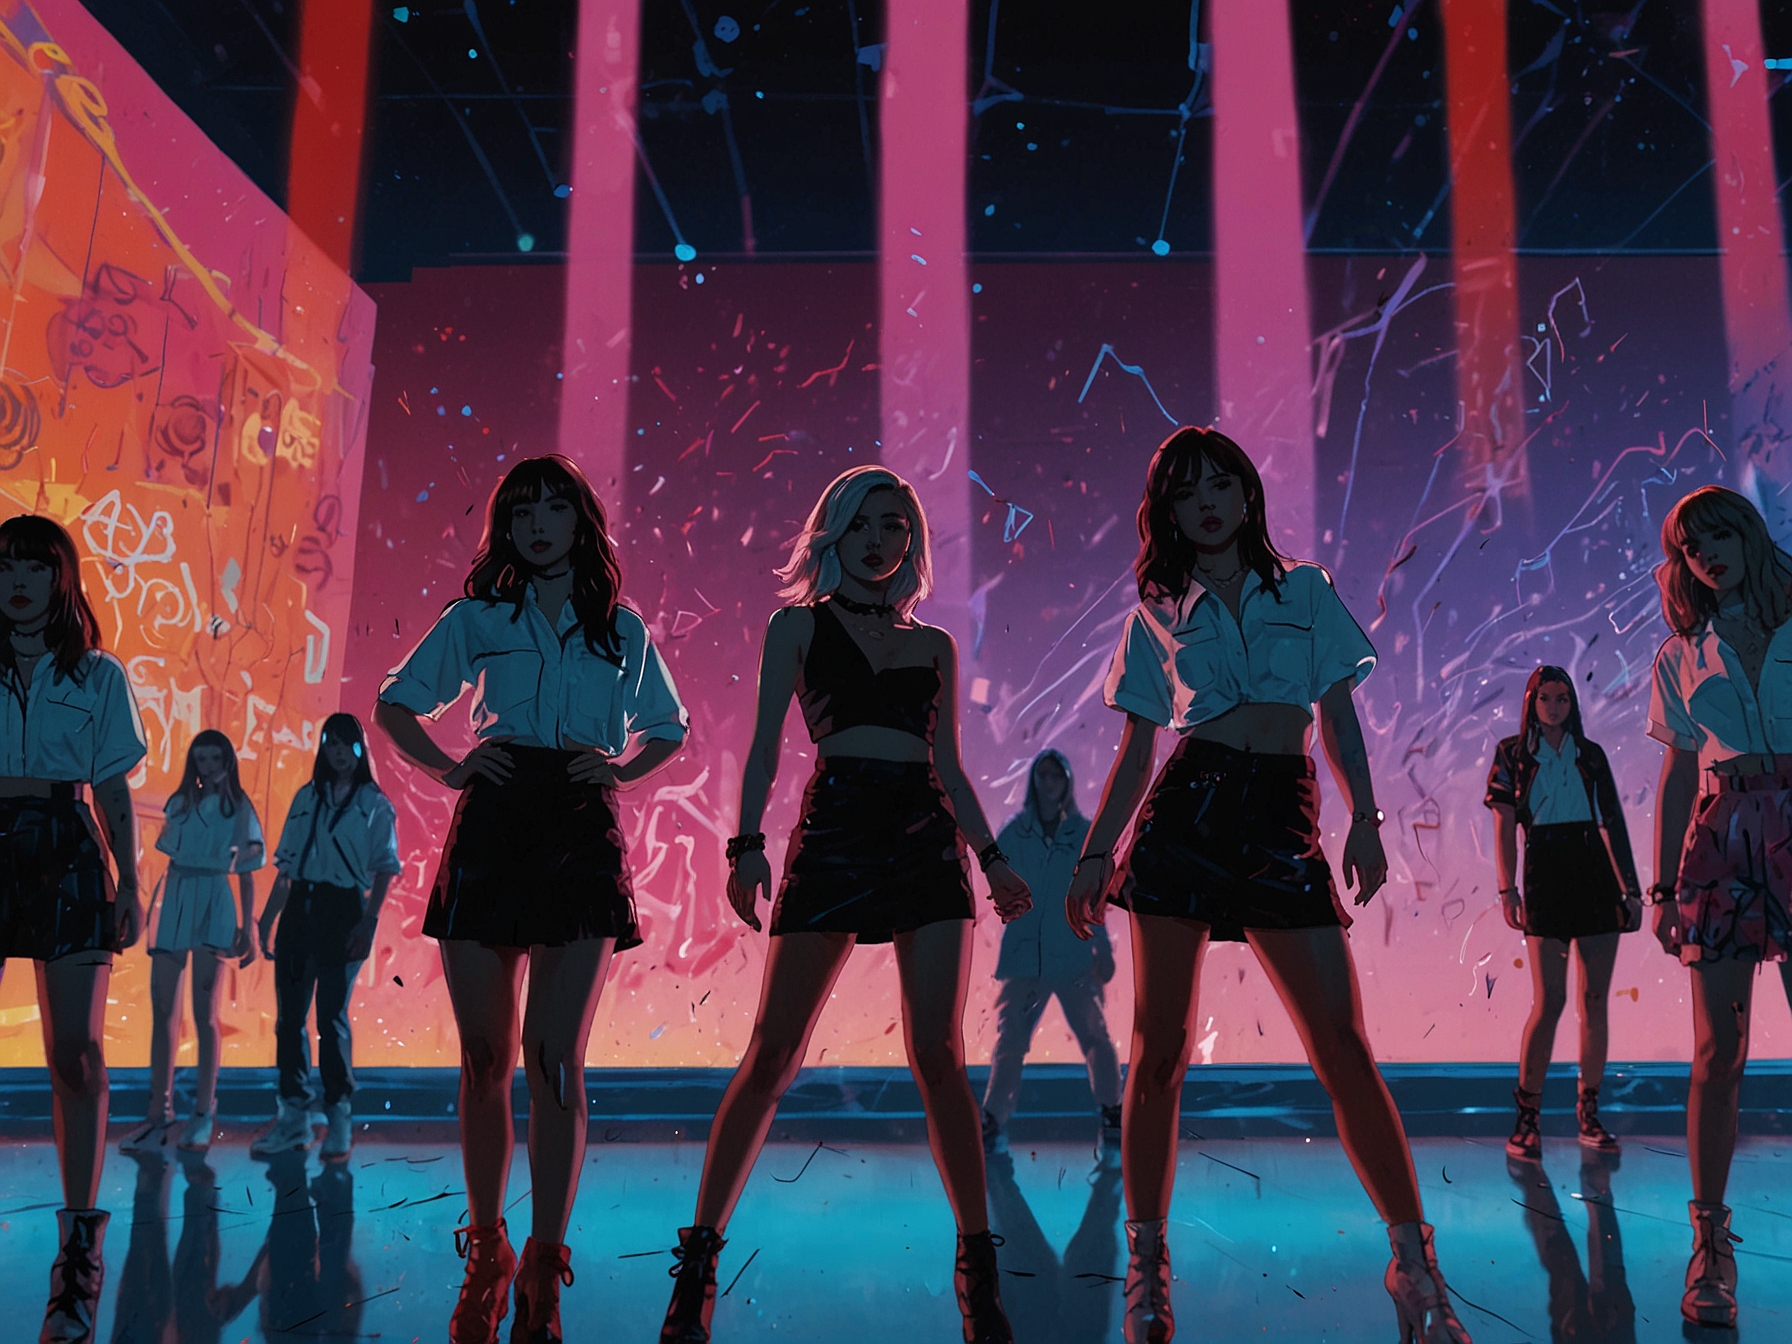 A scene from BABYMONSTER's 'Forever' music video, showcasing the group members performing dynamic choreography against a backdrop of vivid, time-themed visuals.